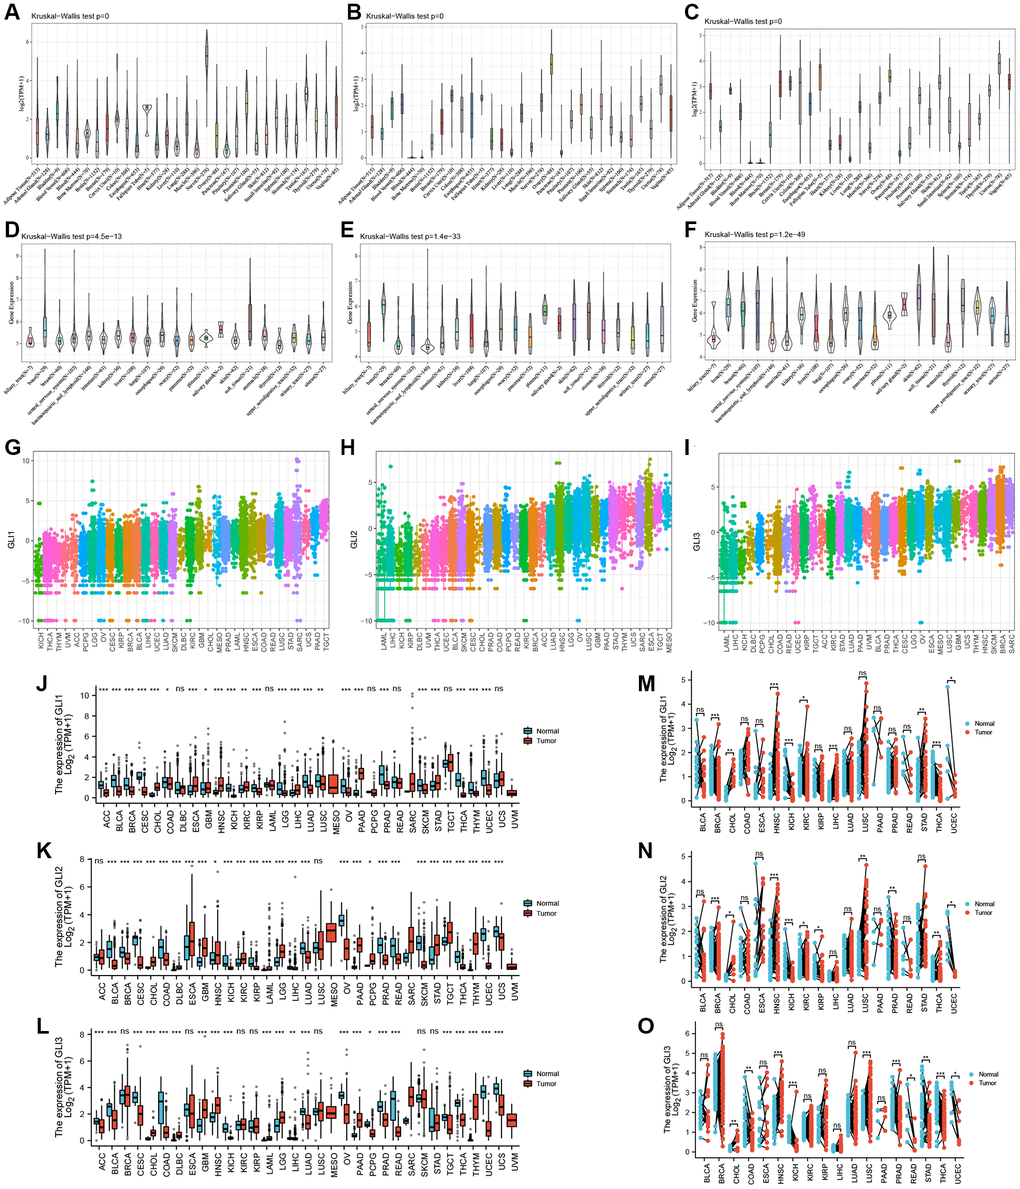 Expression profiles of GLI1, GLI2, and GLI3. Expression levels of GLI1, GLI2, and GLI3 in normal tissues (A–C), tumor cell lines (D–F), and tumor tissues (G–I) using data from the GTEx database. Combined TCGA and GTEx data of GLI1 (J), GLI2 (K), and GLI3 (L) expression differences between tumor and normal tissues (*p **p ***p M), GLI2 (N), and GLI3 (O) between paired tumors and normal tissues using data from the TGGA database (*p **p ***p 